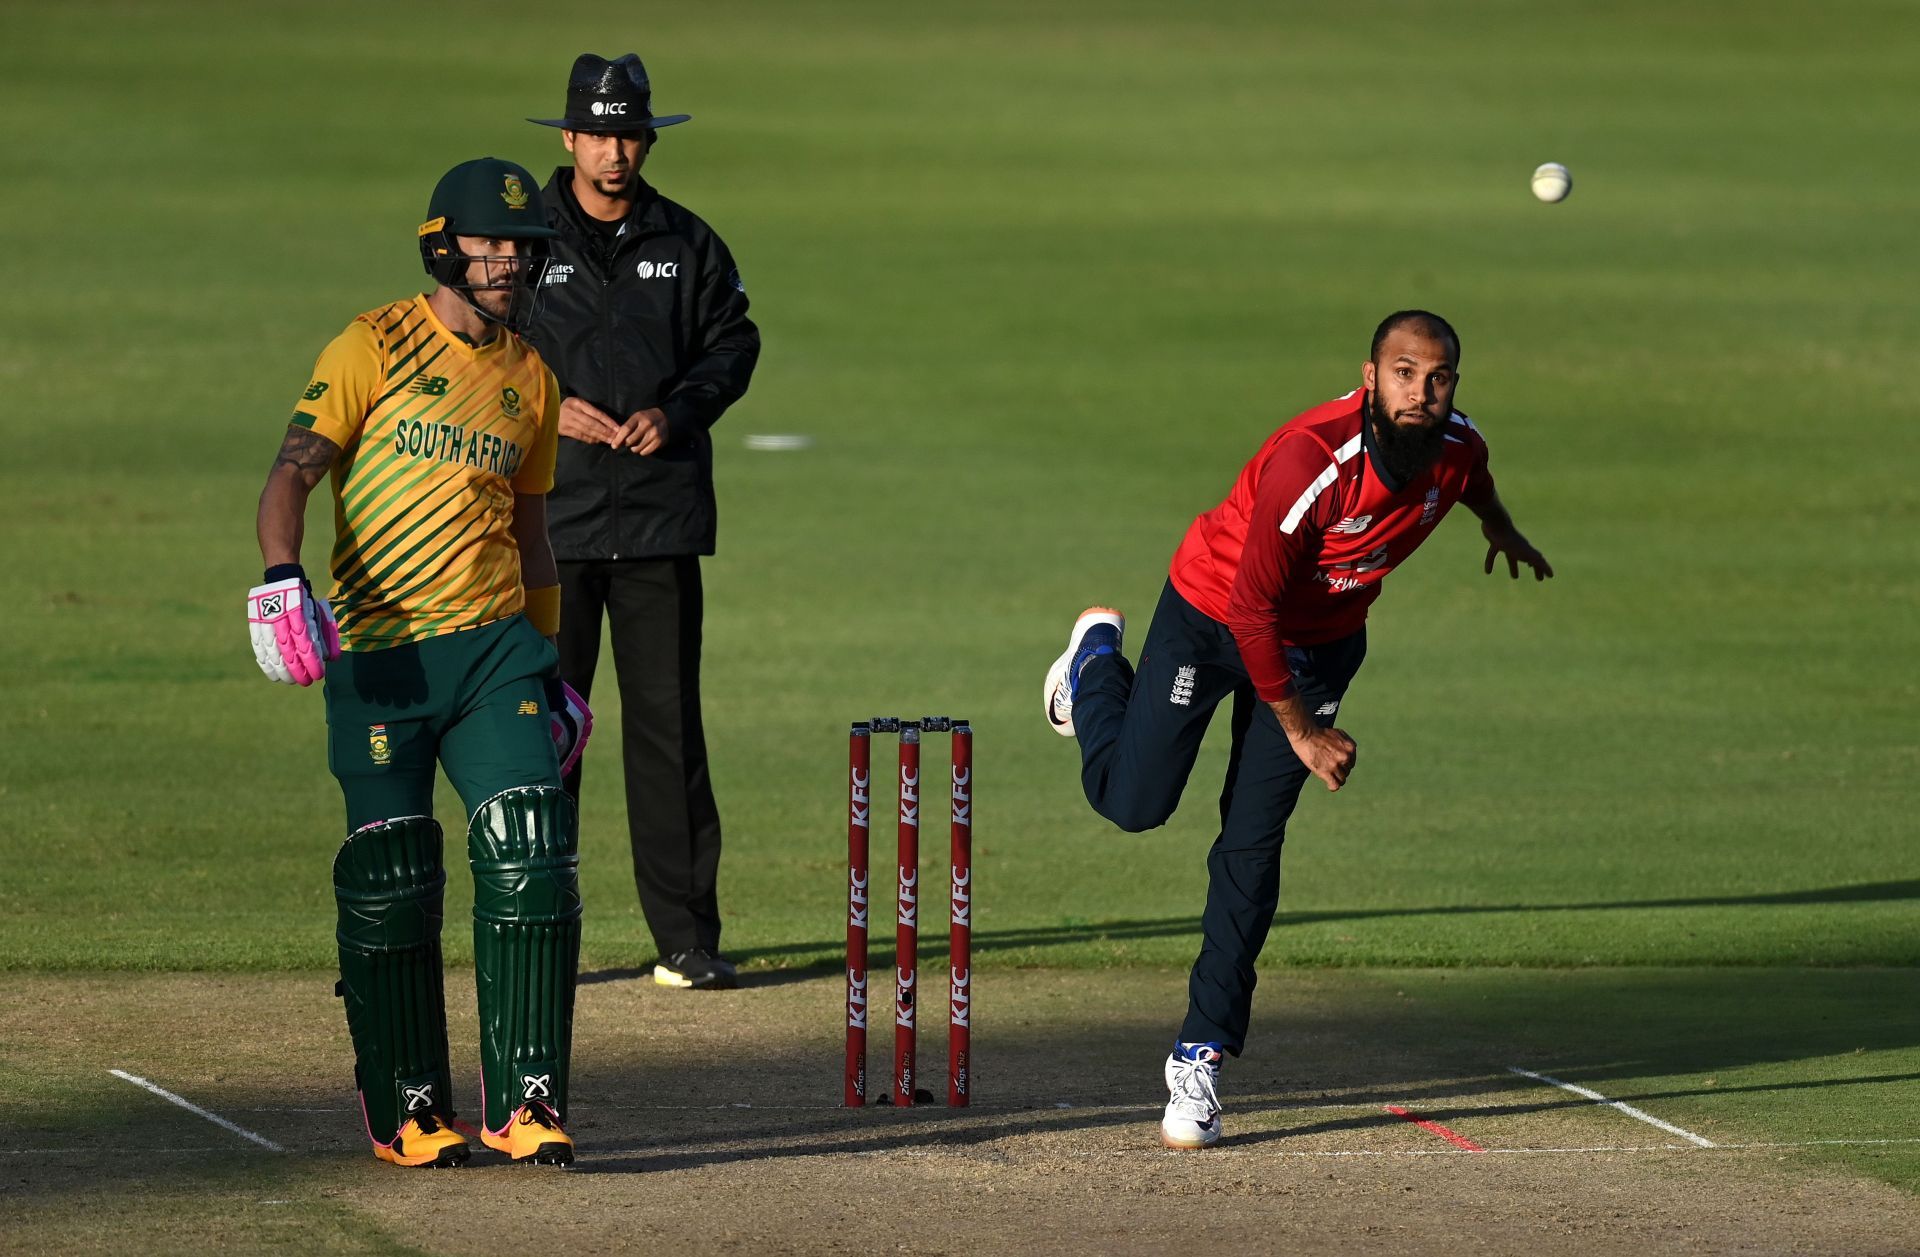 England and South Africa will play in the last Group 1 match of ICC T20 World Cup 2021 tomorrow at the Sharjah Cricket Stadium